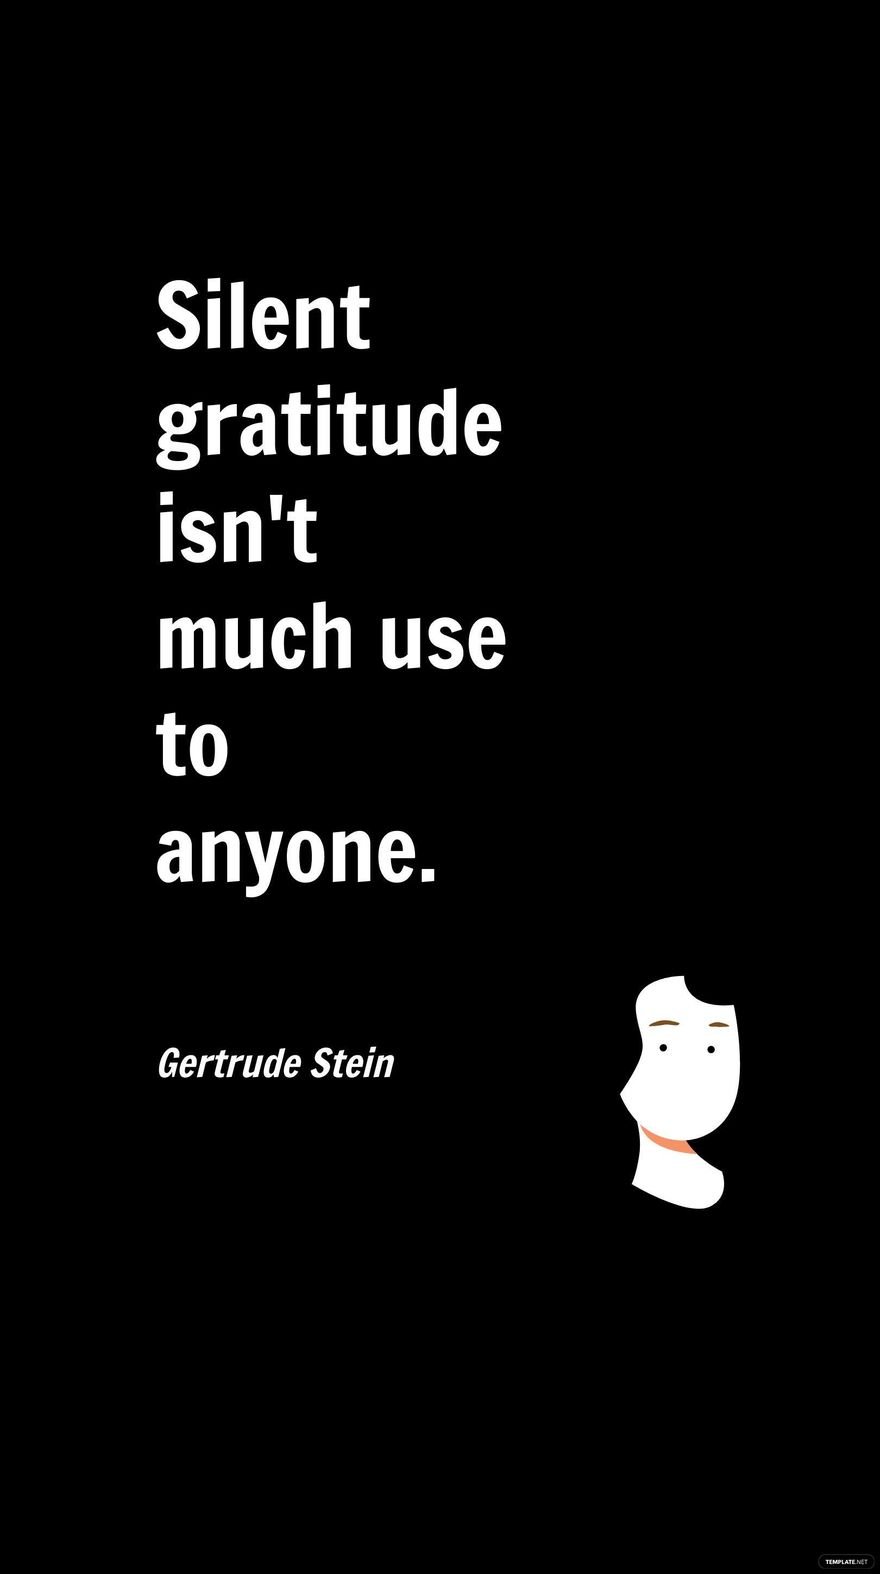 Free Gertrude Stein - Silent gratitude isn't much use to anyone. in JPG